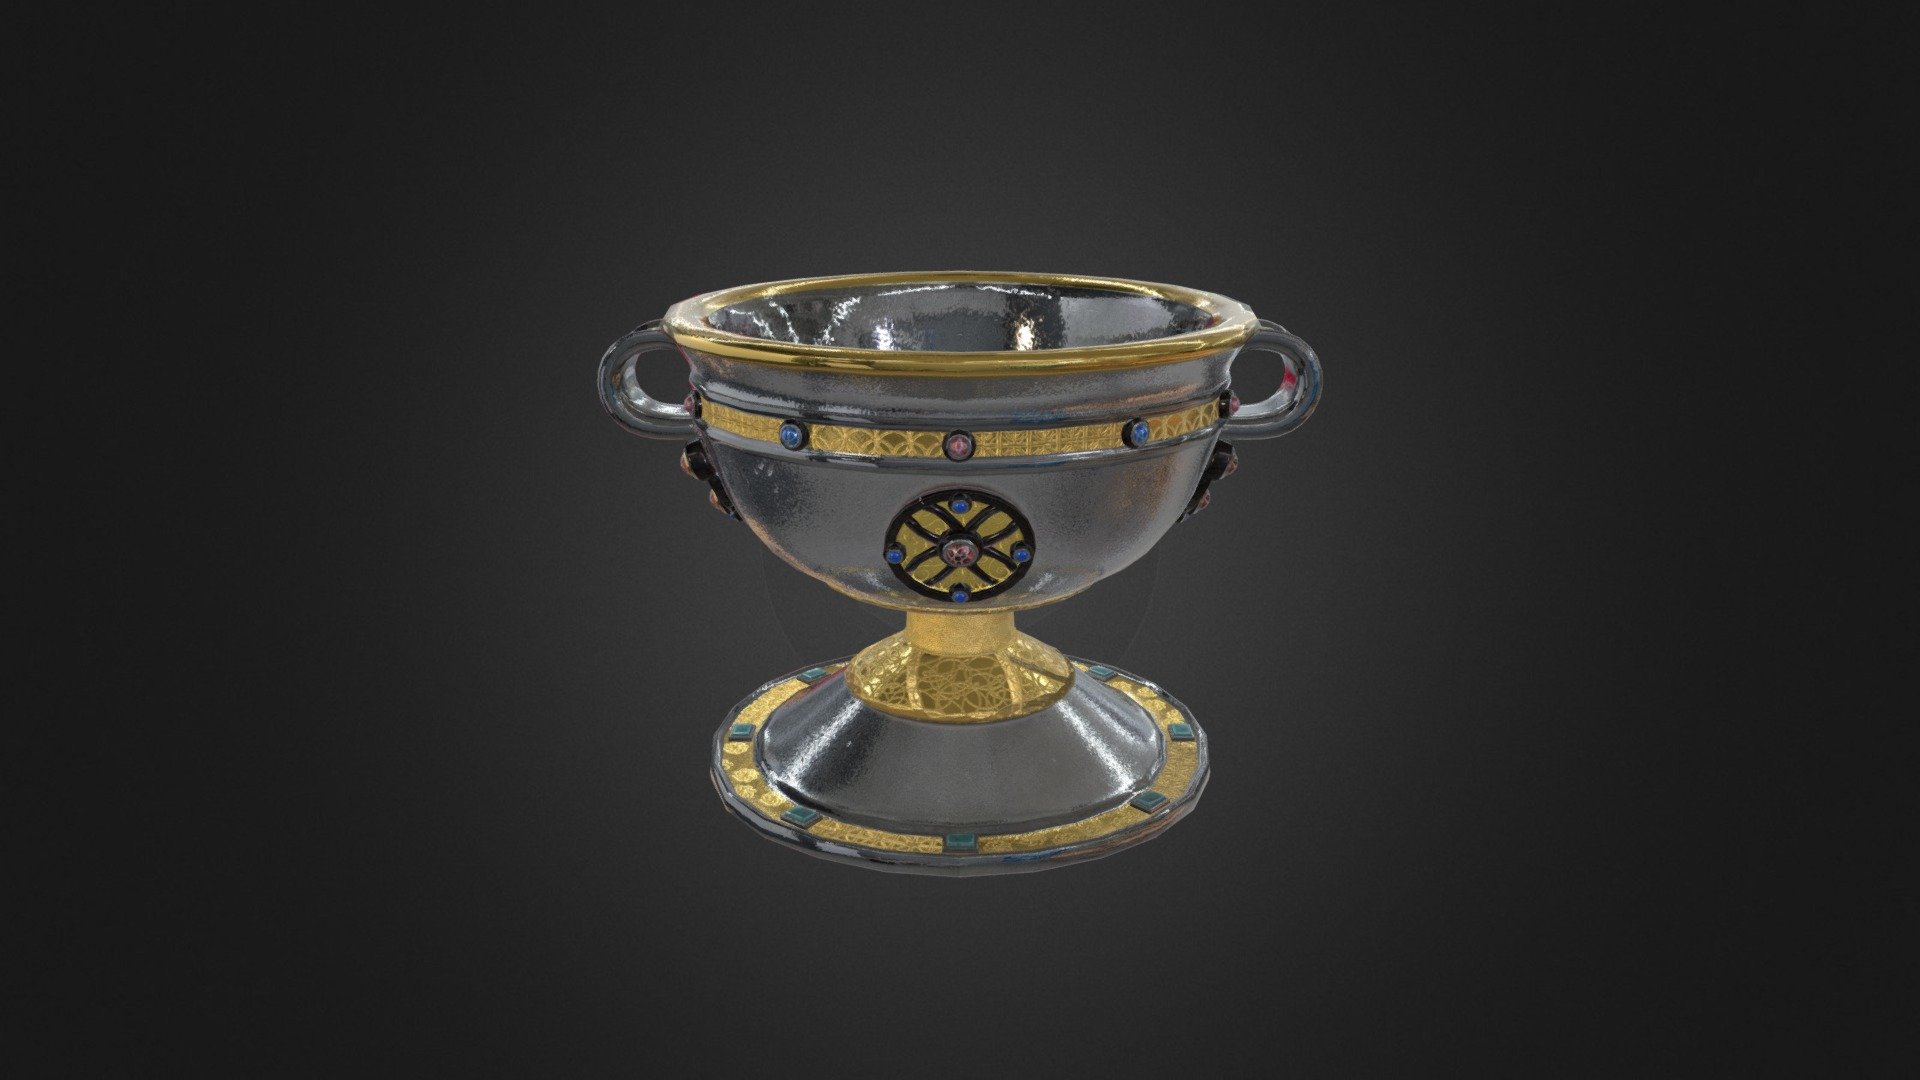 3D model of the Ardagh Chalice - Ardagh Chalice - 3D model by imOmgCC 3d model